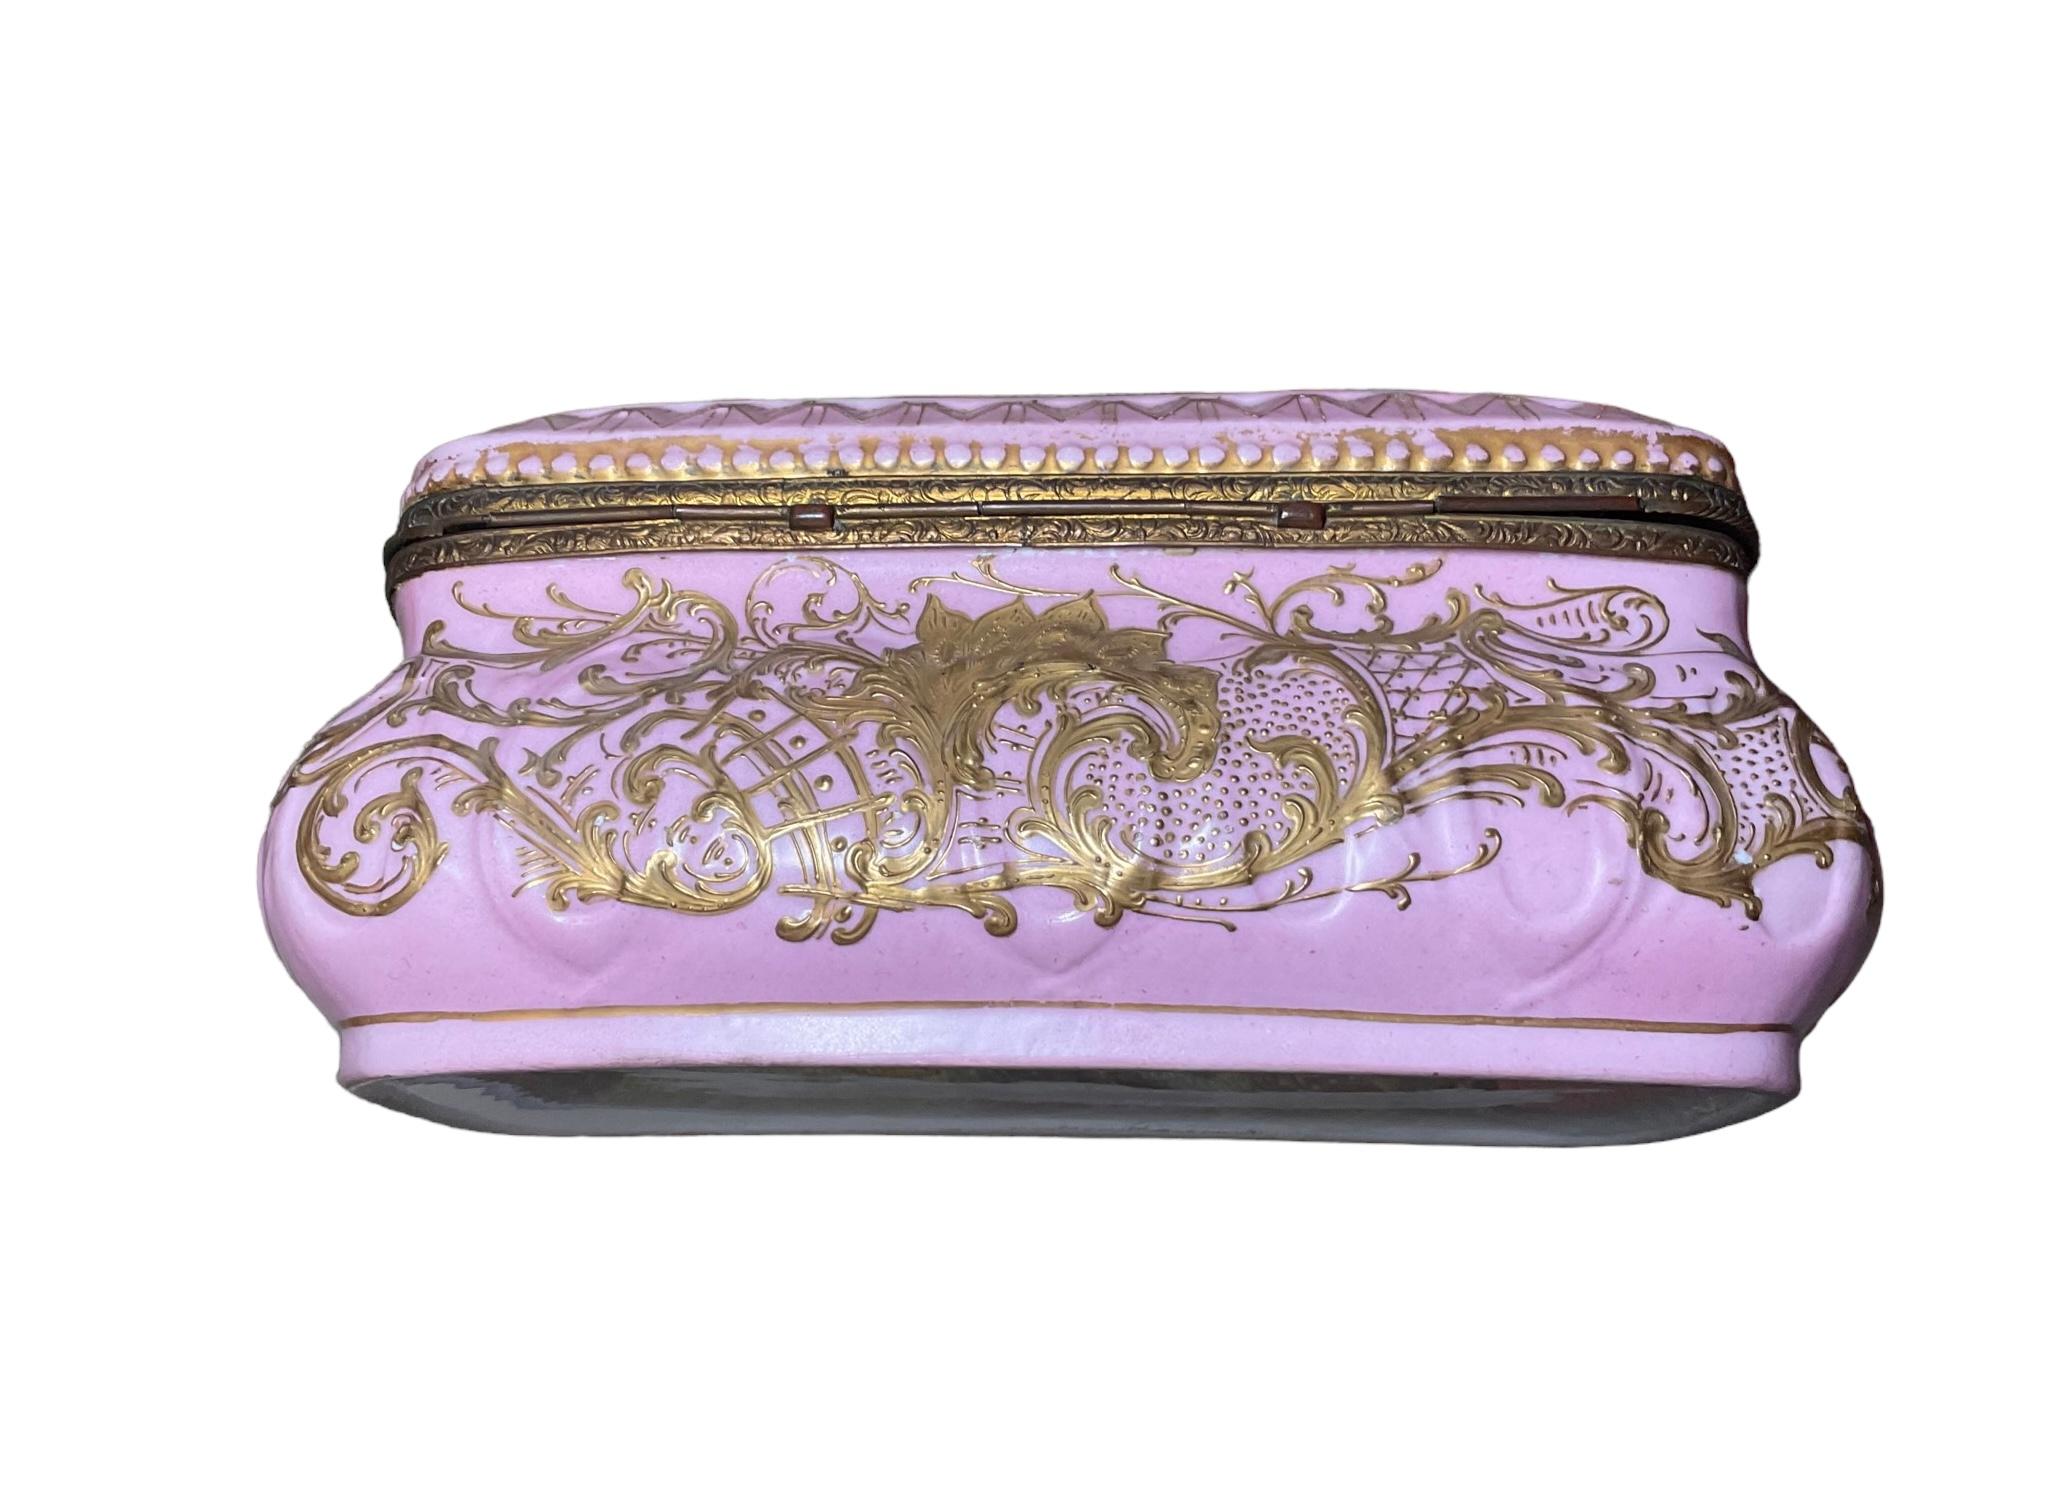 Chateau De Tuileries Porcelain Rectangular Casket In Good Condition For Sale In Guaynabo, PR